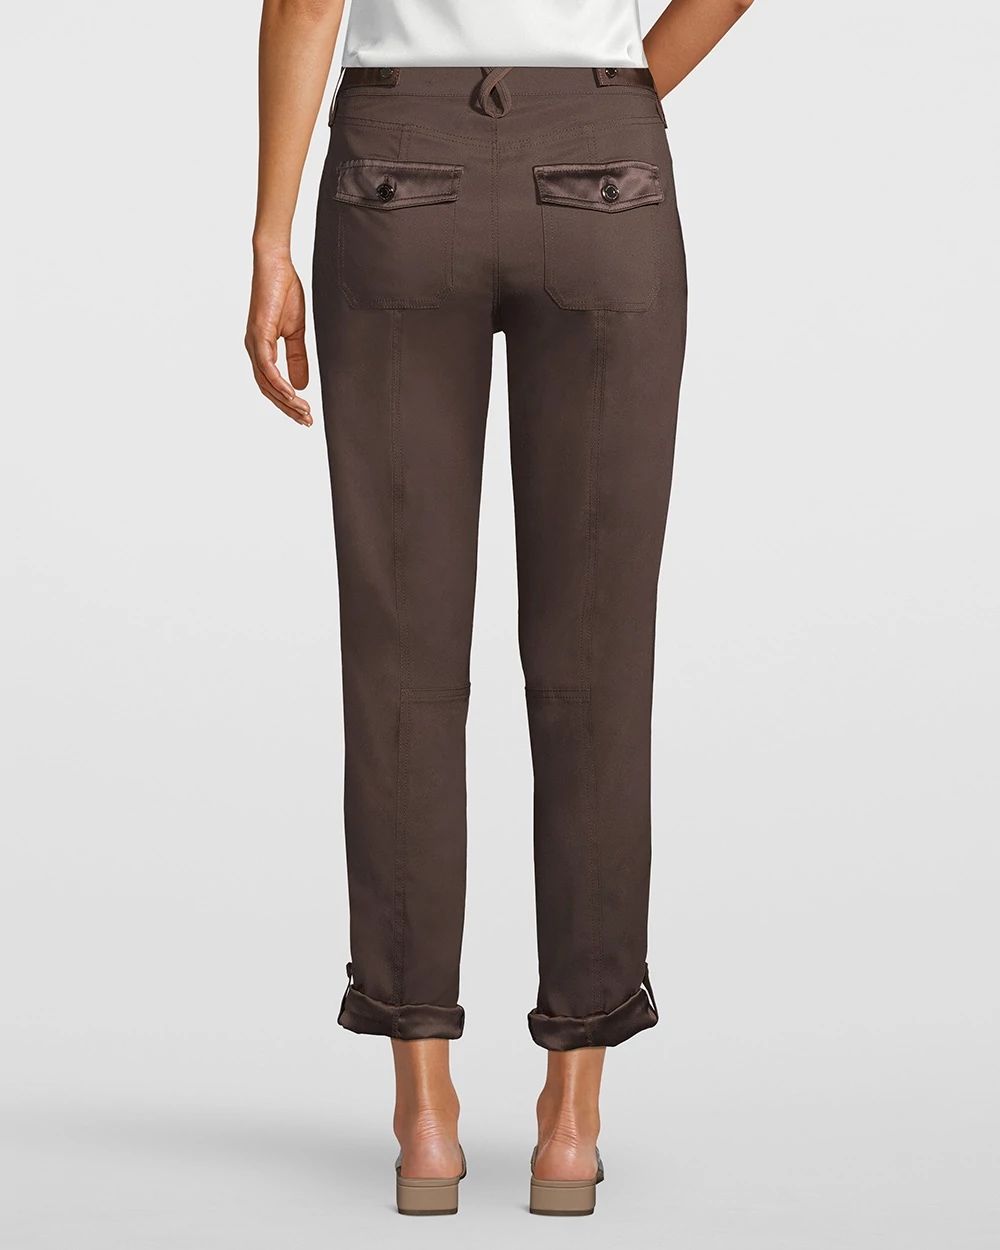 Mid-Rise Utility Straight Crop Jeans click to view larger image.